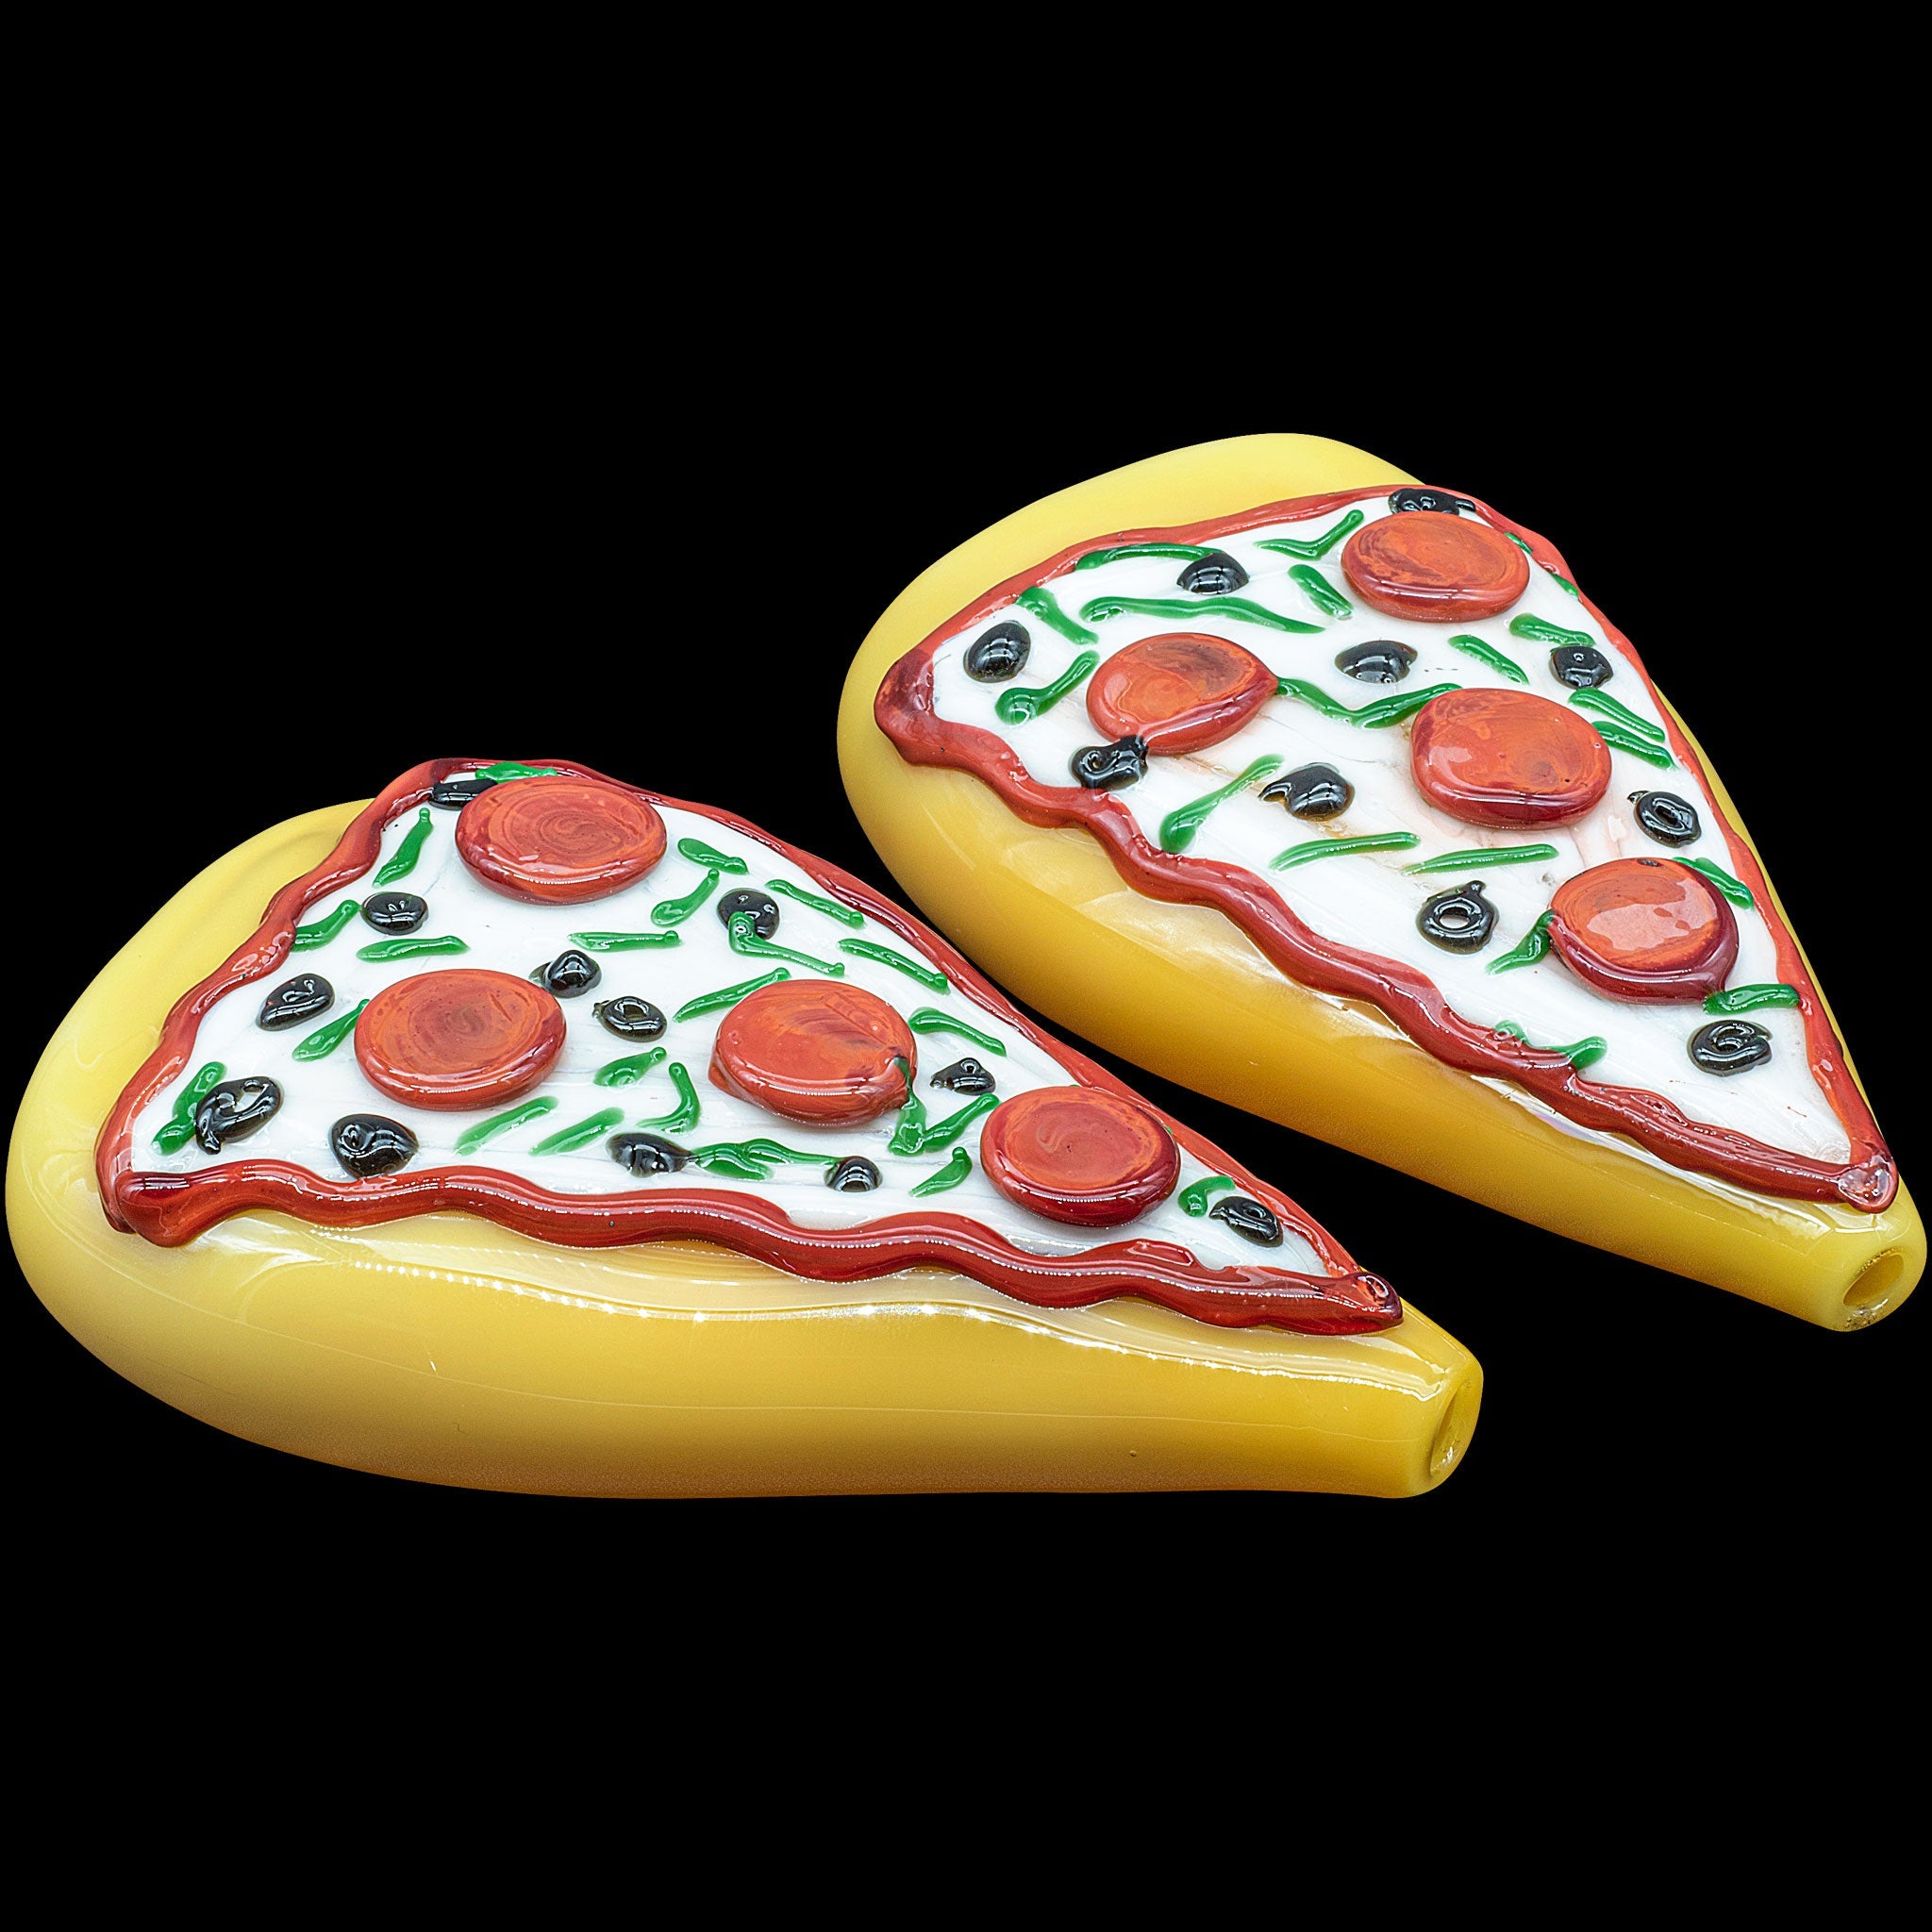 LA Pipes "Pizza Party" Glass Pipe